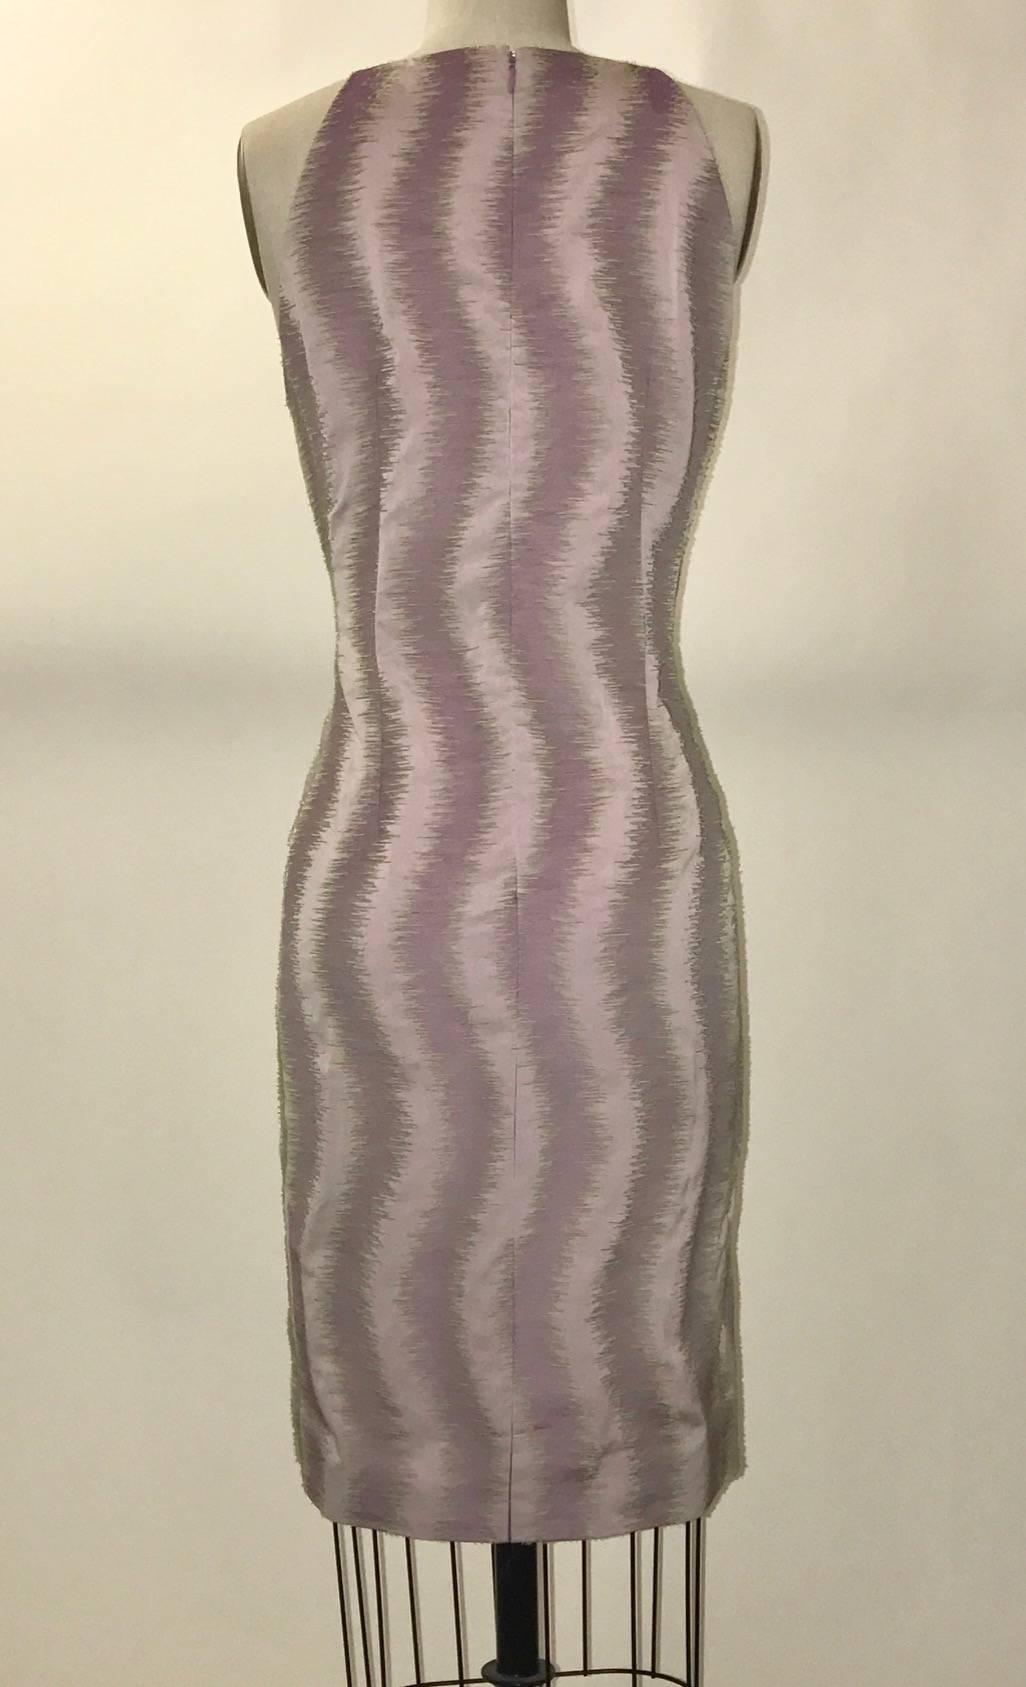 Gianni Versace Couture vintage 1990s sleeveless shift dress in a lavender wave pattern with nubby sea green accents. (Amazing textile, check out close up!) Back zip and hook and eye.

Content unknown, no fabric label.

Made in Italy.

Size IT